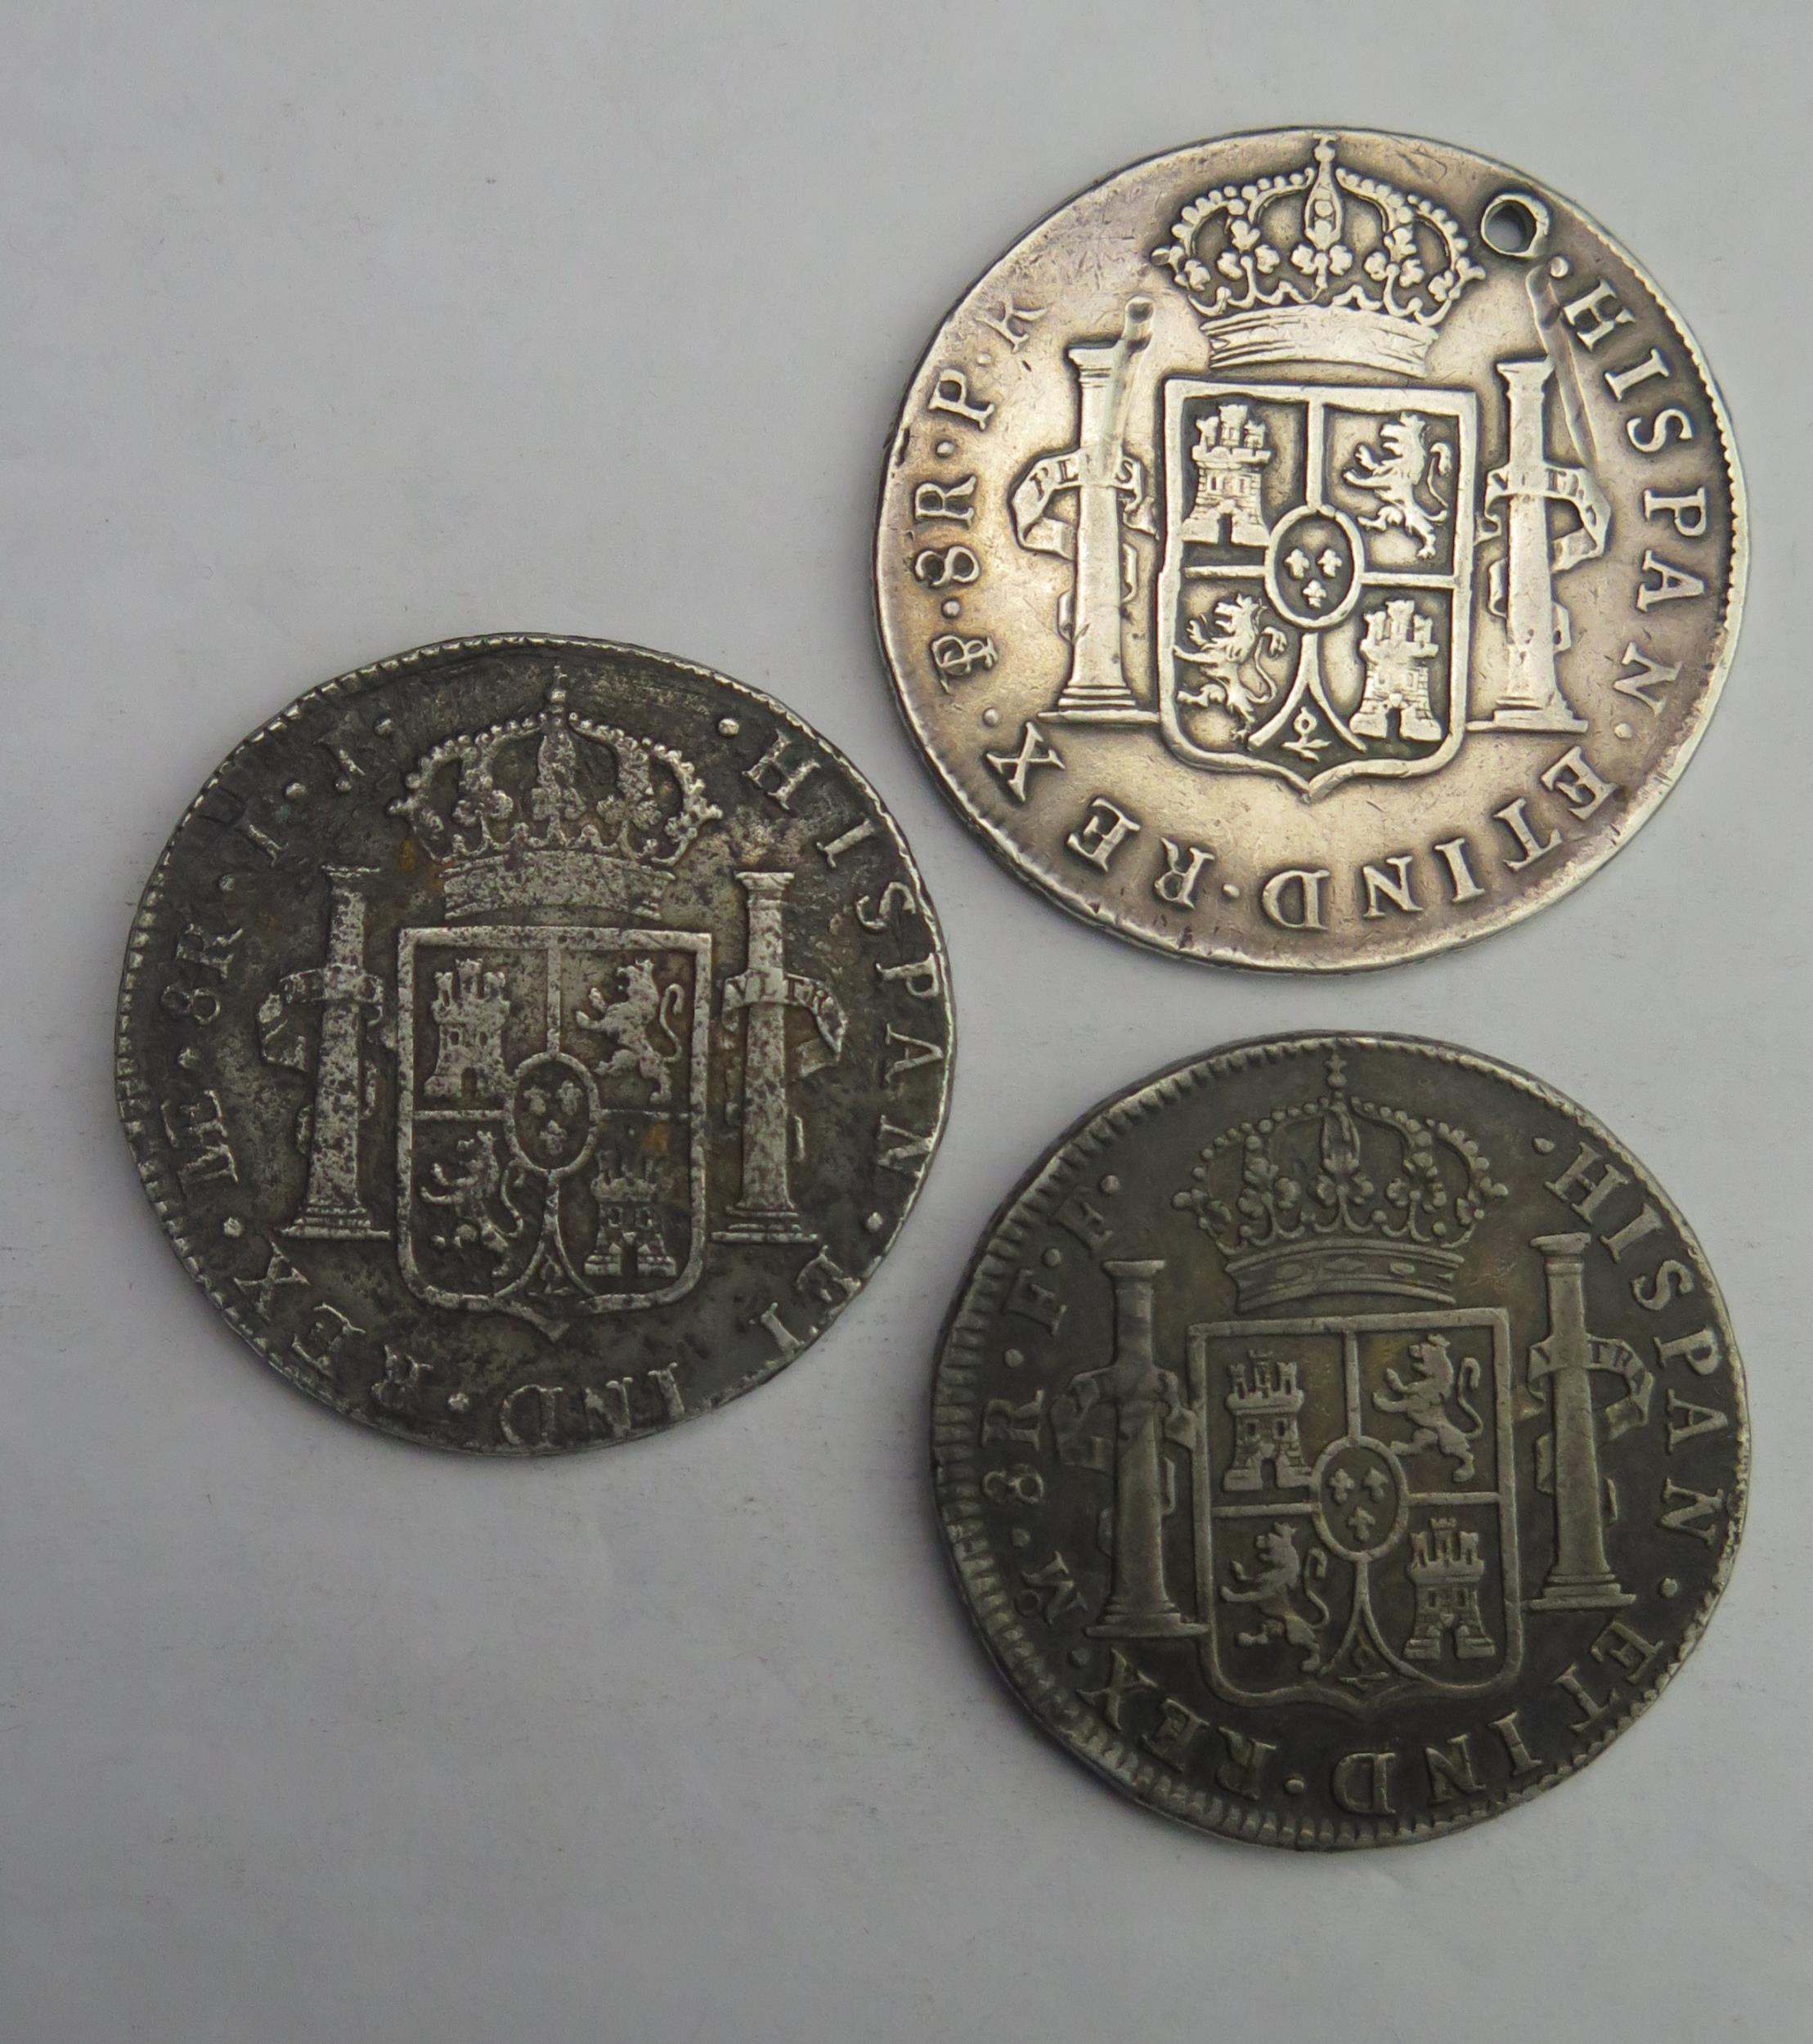 Spain - 8 Reales pieces 1797 / 1778 and 1789 (holed) - Image 2 of 2